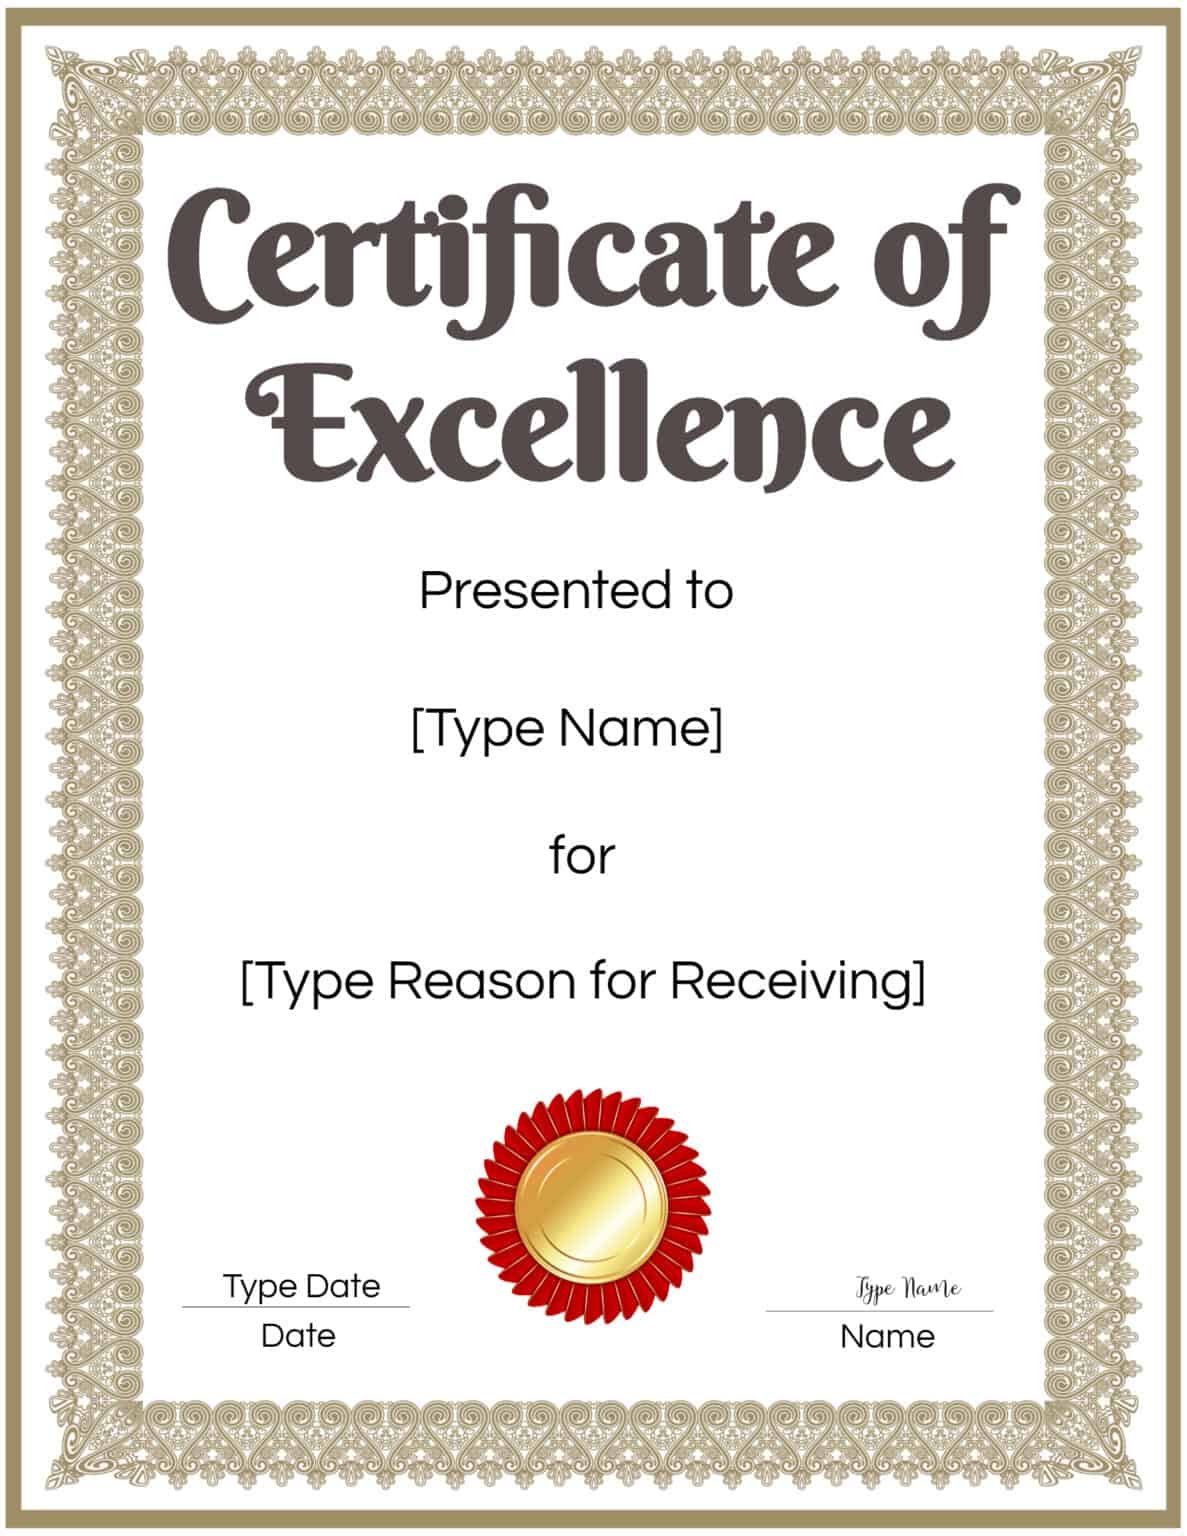 certificates-of-excellence-free-printable-bank2home